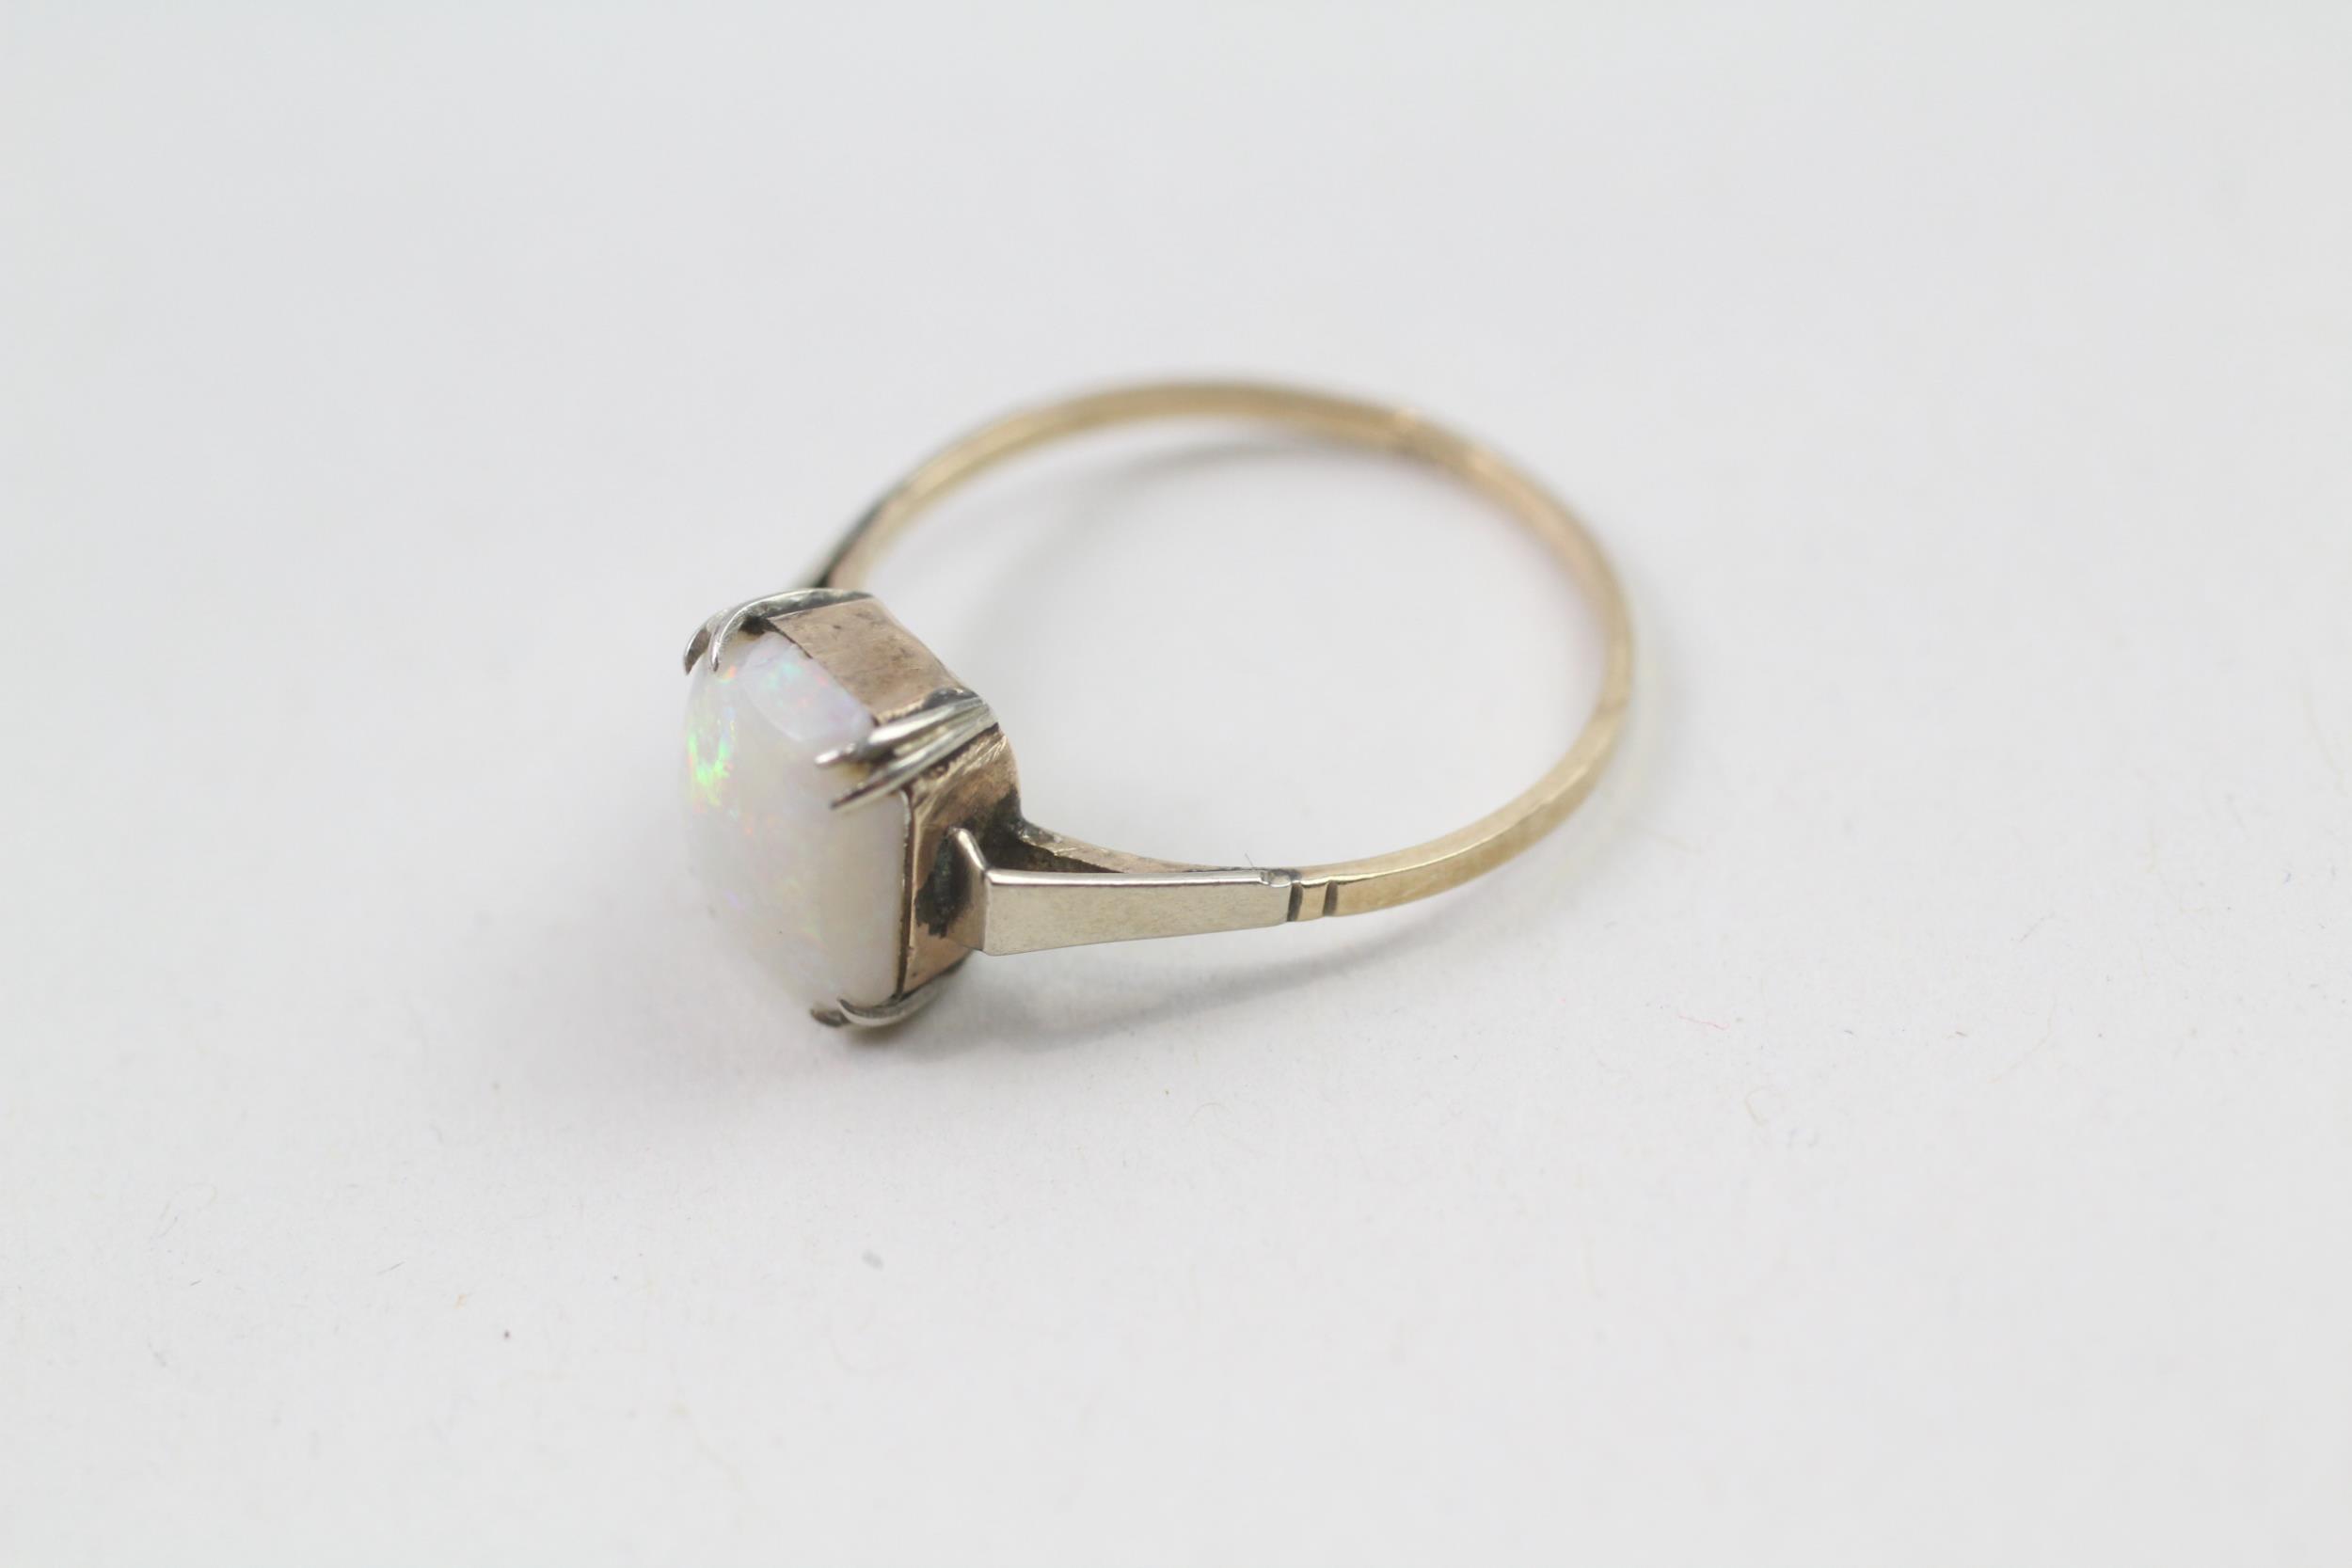 9ct gold opal dress ring (1.2g) Size N 1/2 - Image 2 of 4